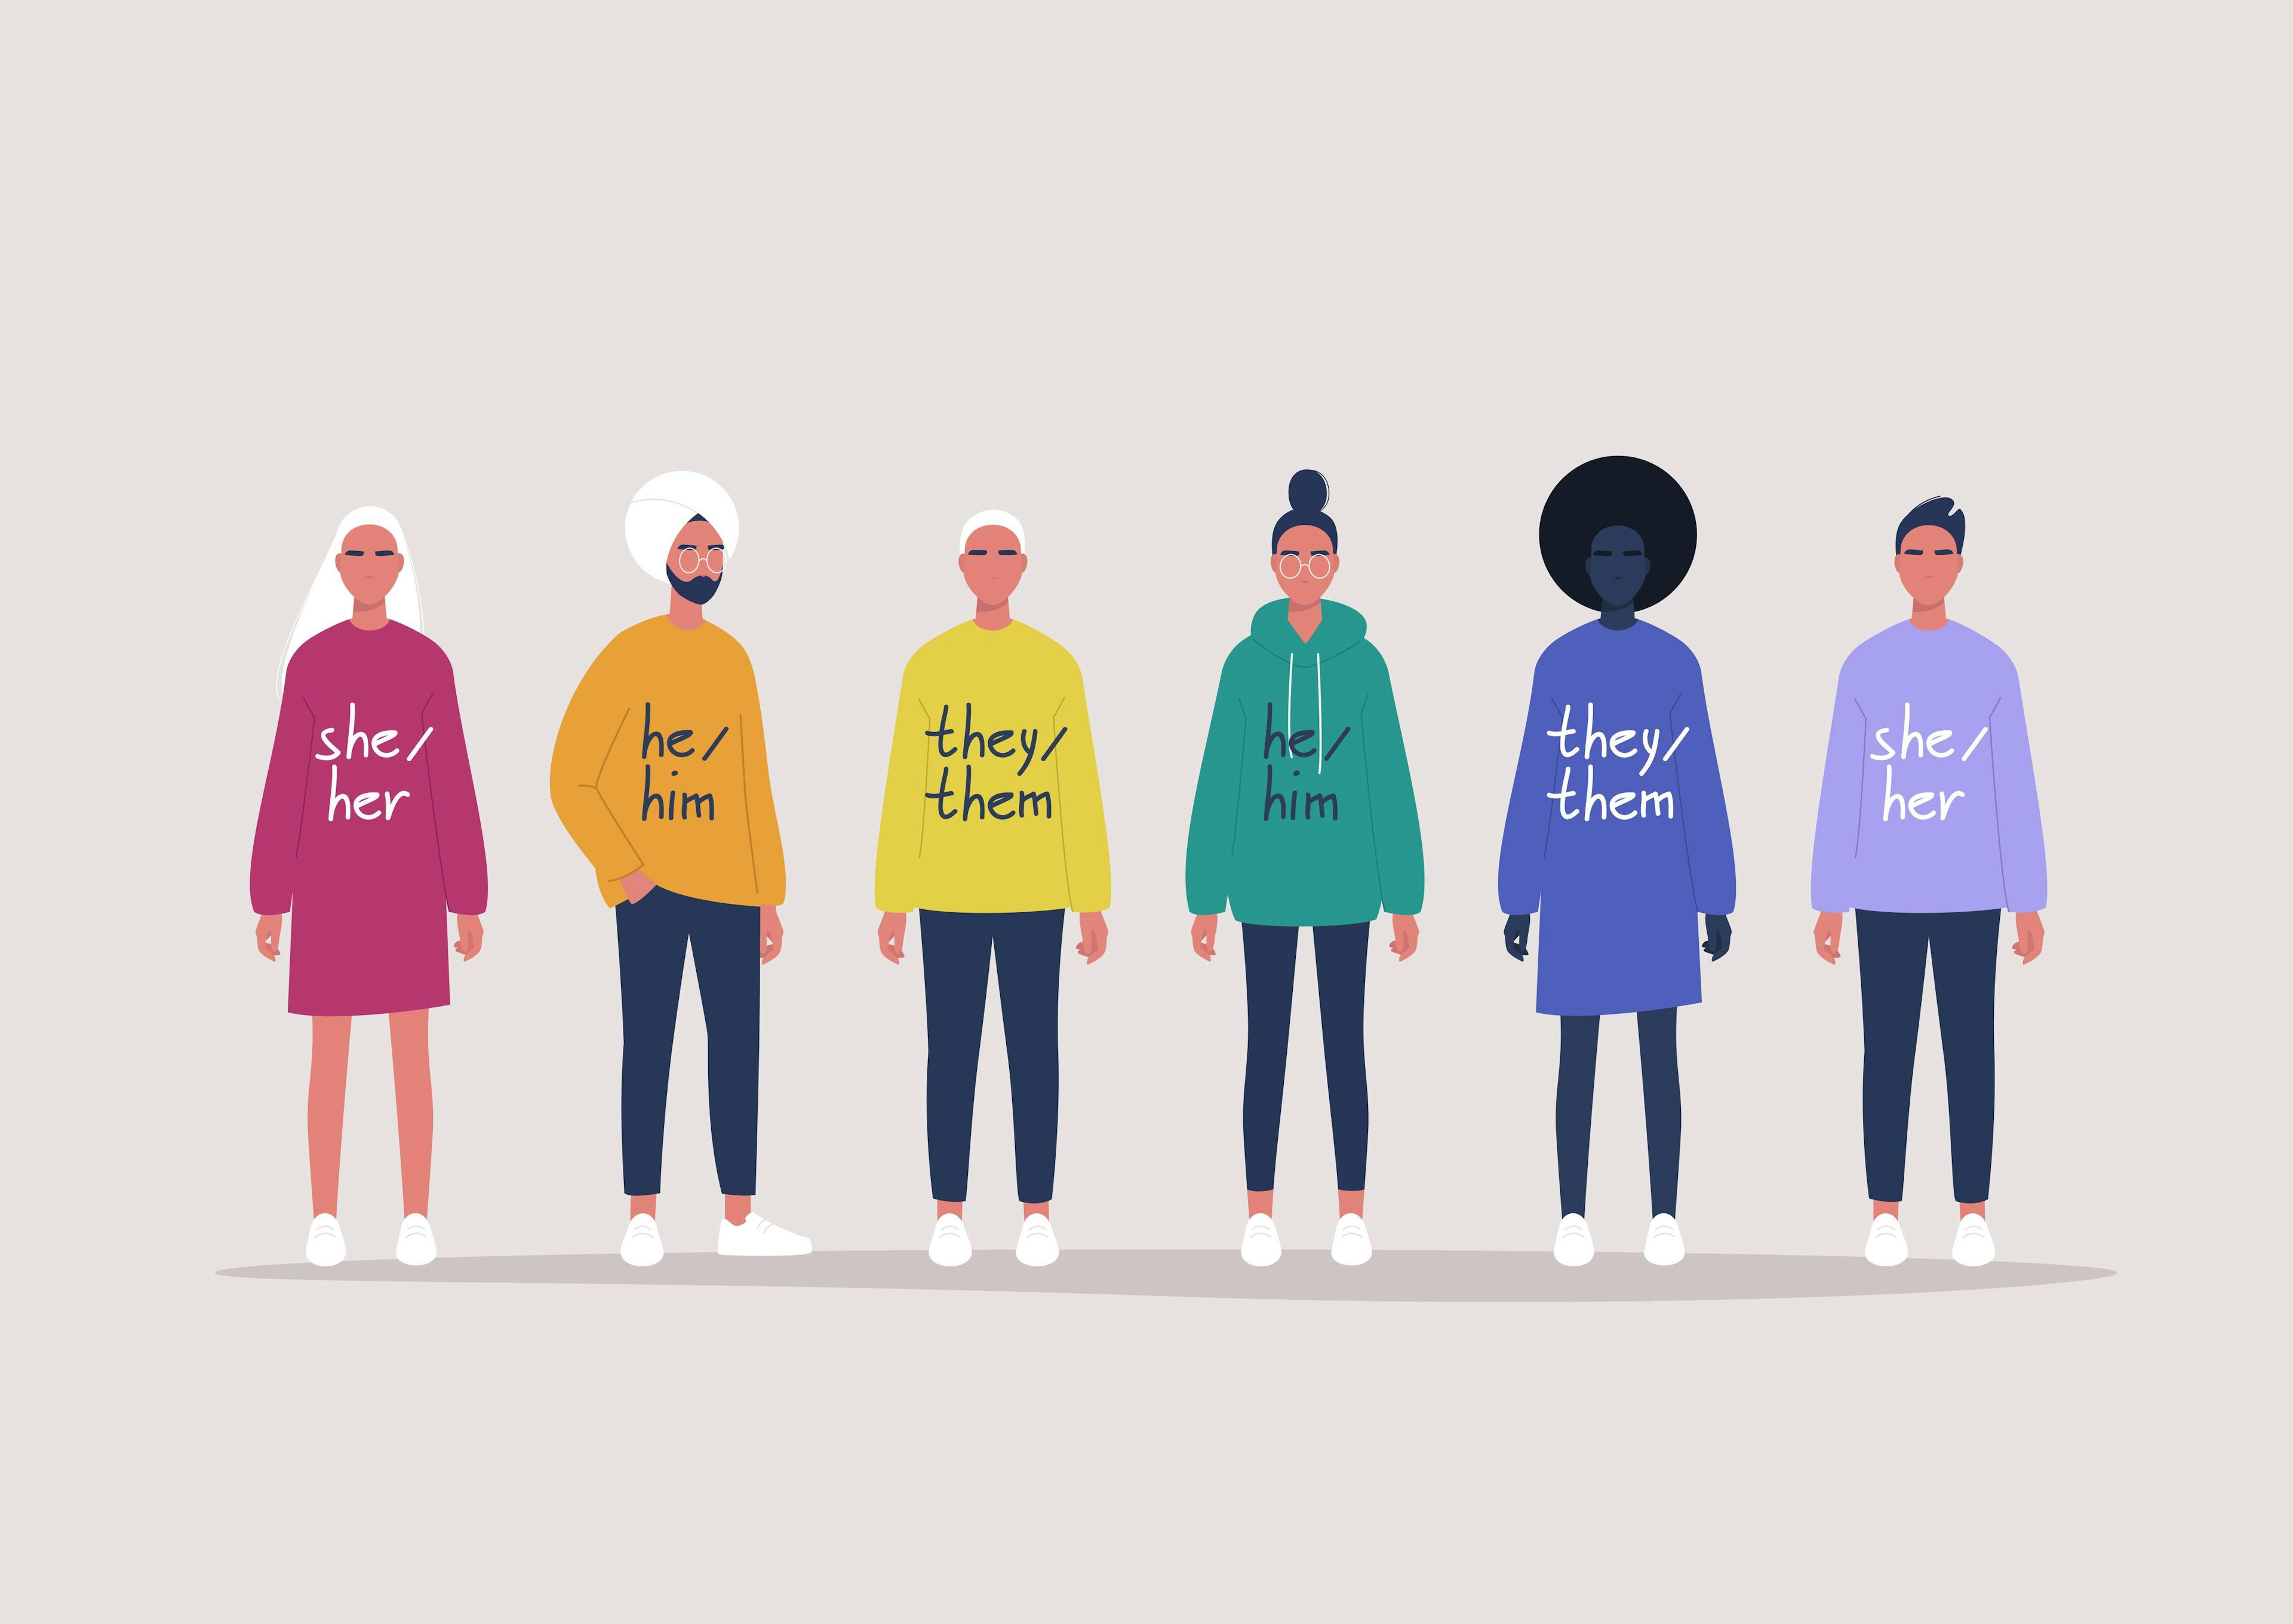 Artistic rendering of young people wearing sweaters with gender pronouns on them | Image credit: nadia_snopek - stock.adobe.com